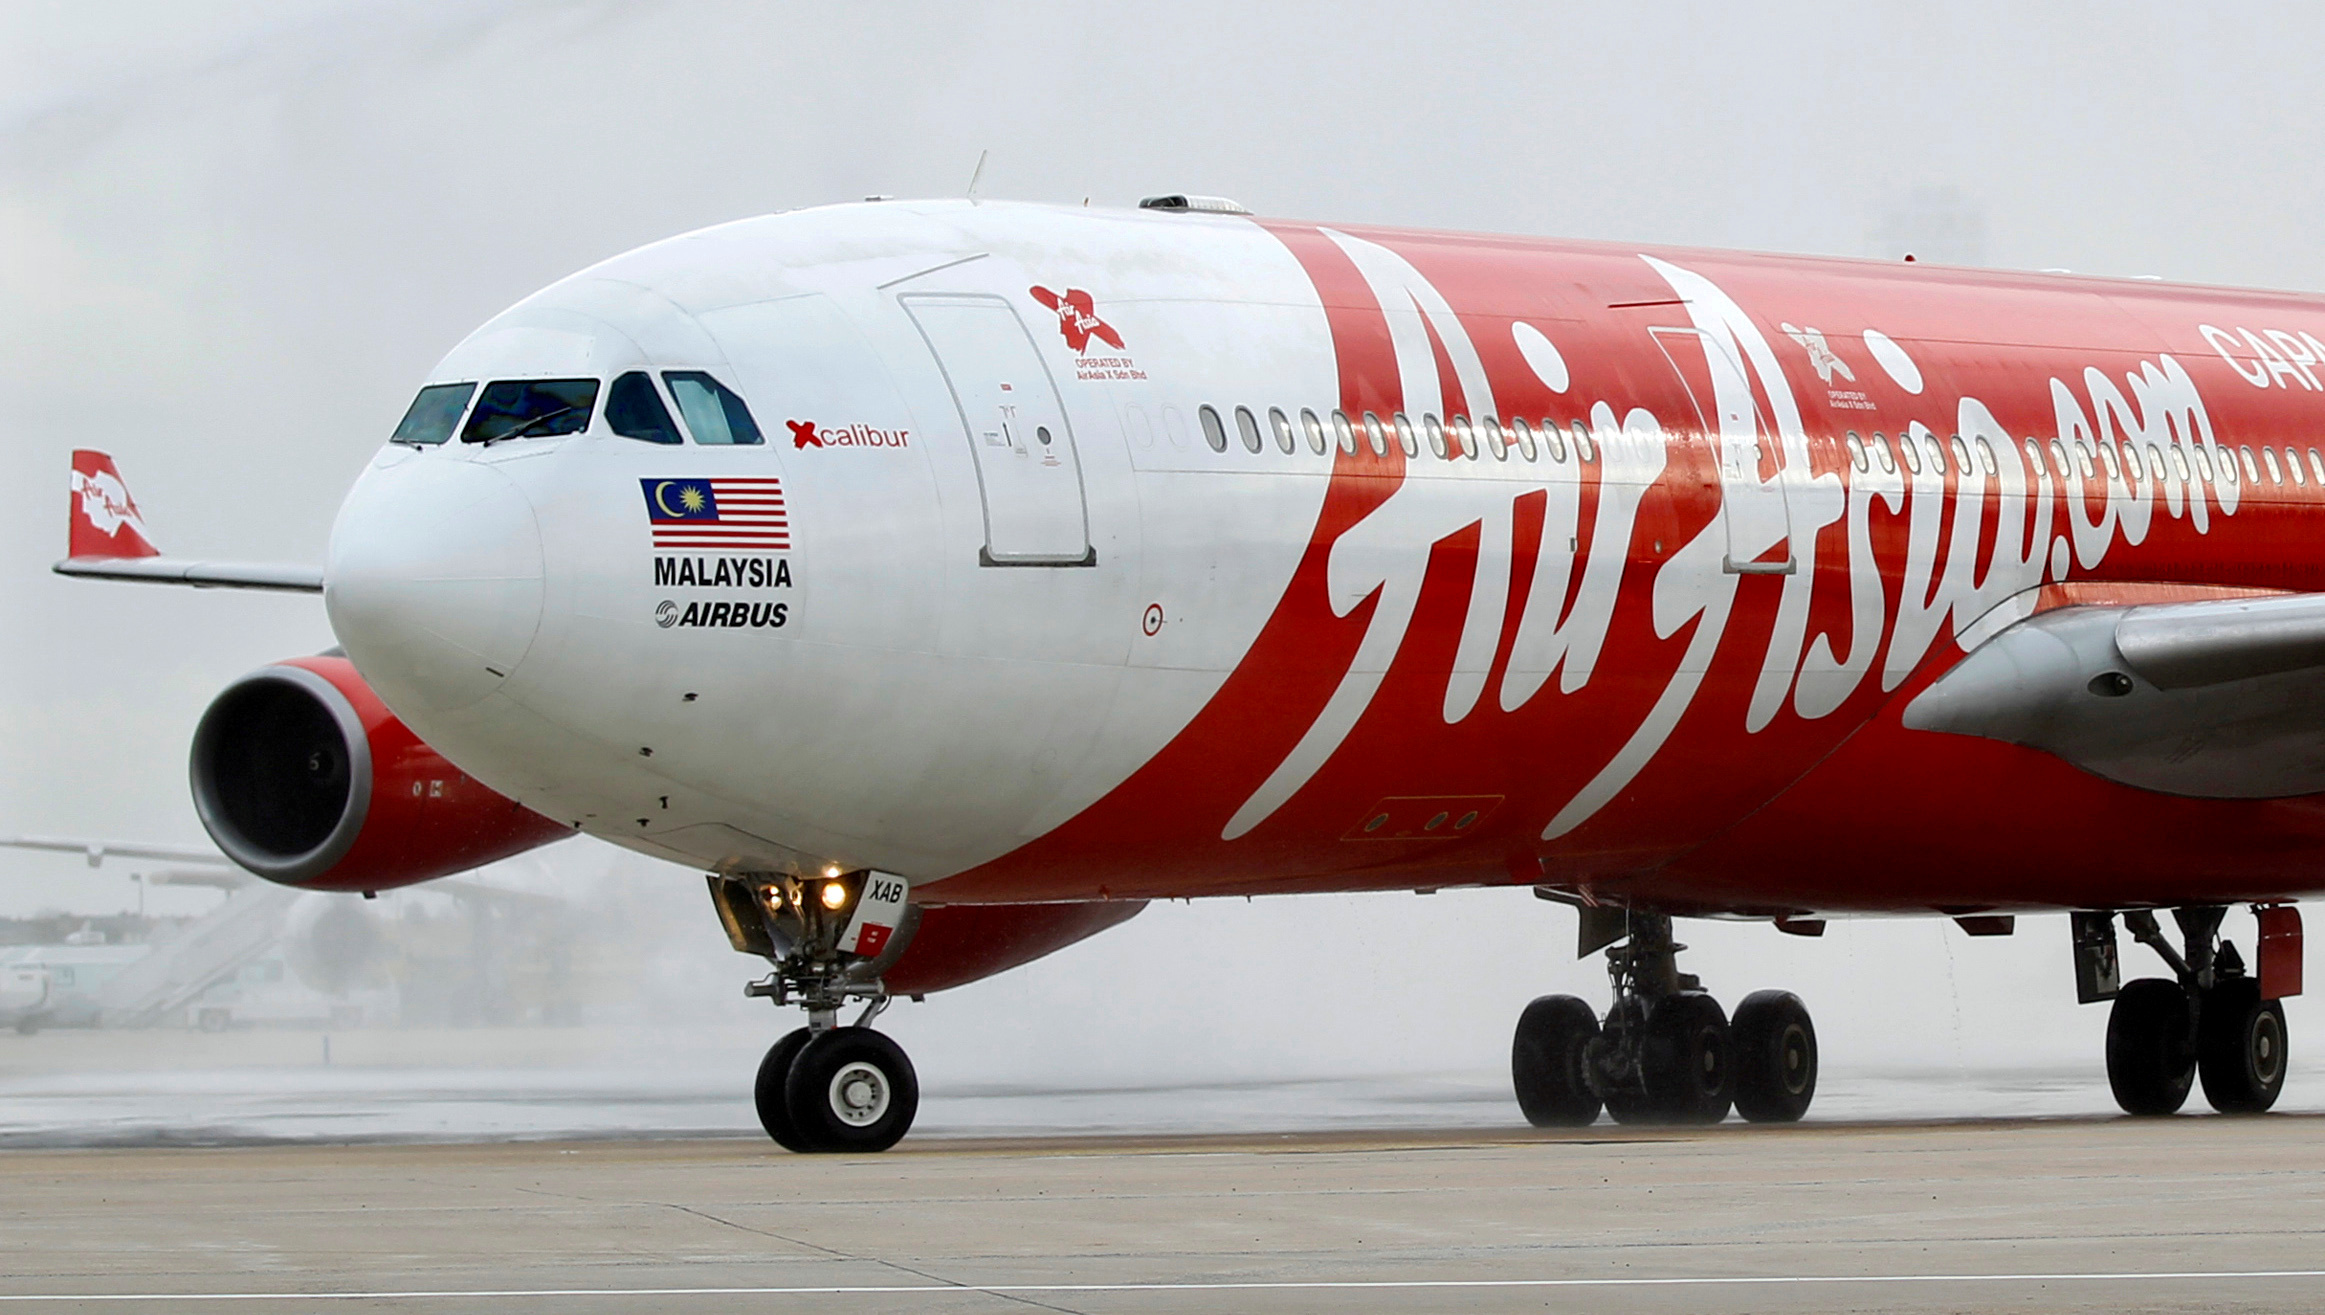 File photo of an AirAsia X Airbus passenger jet arriving at Orly airport near Paris